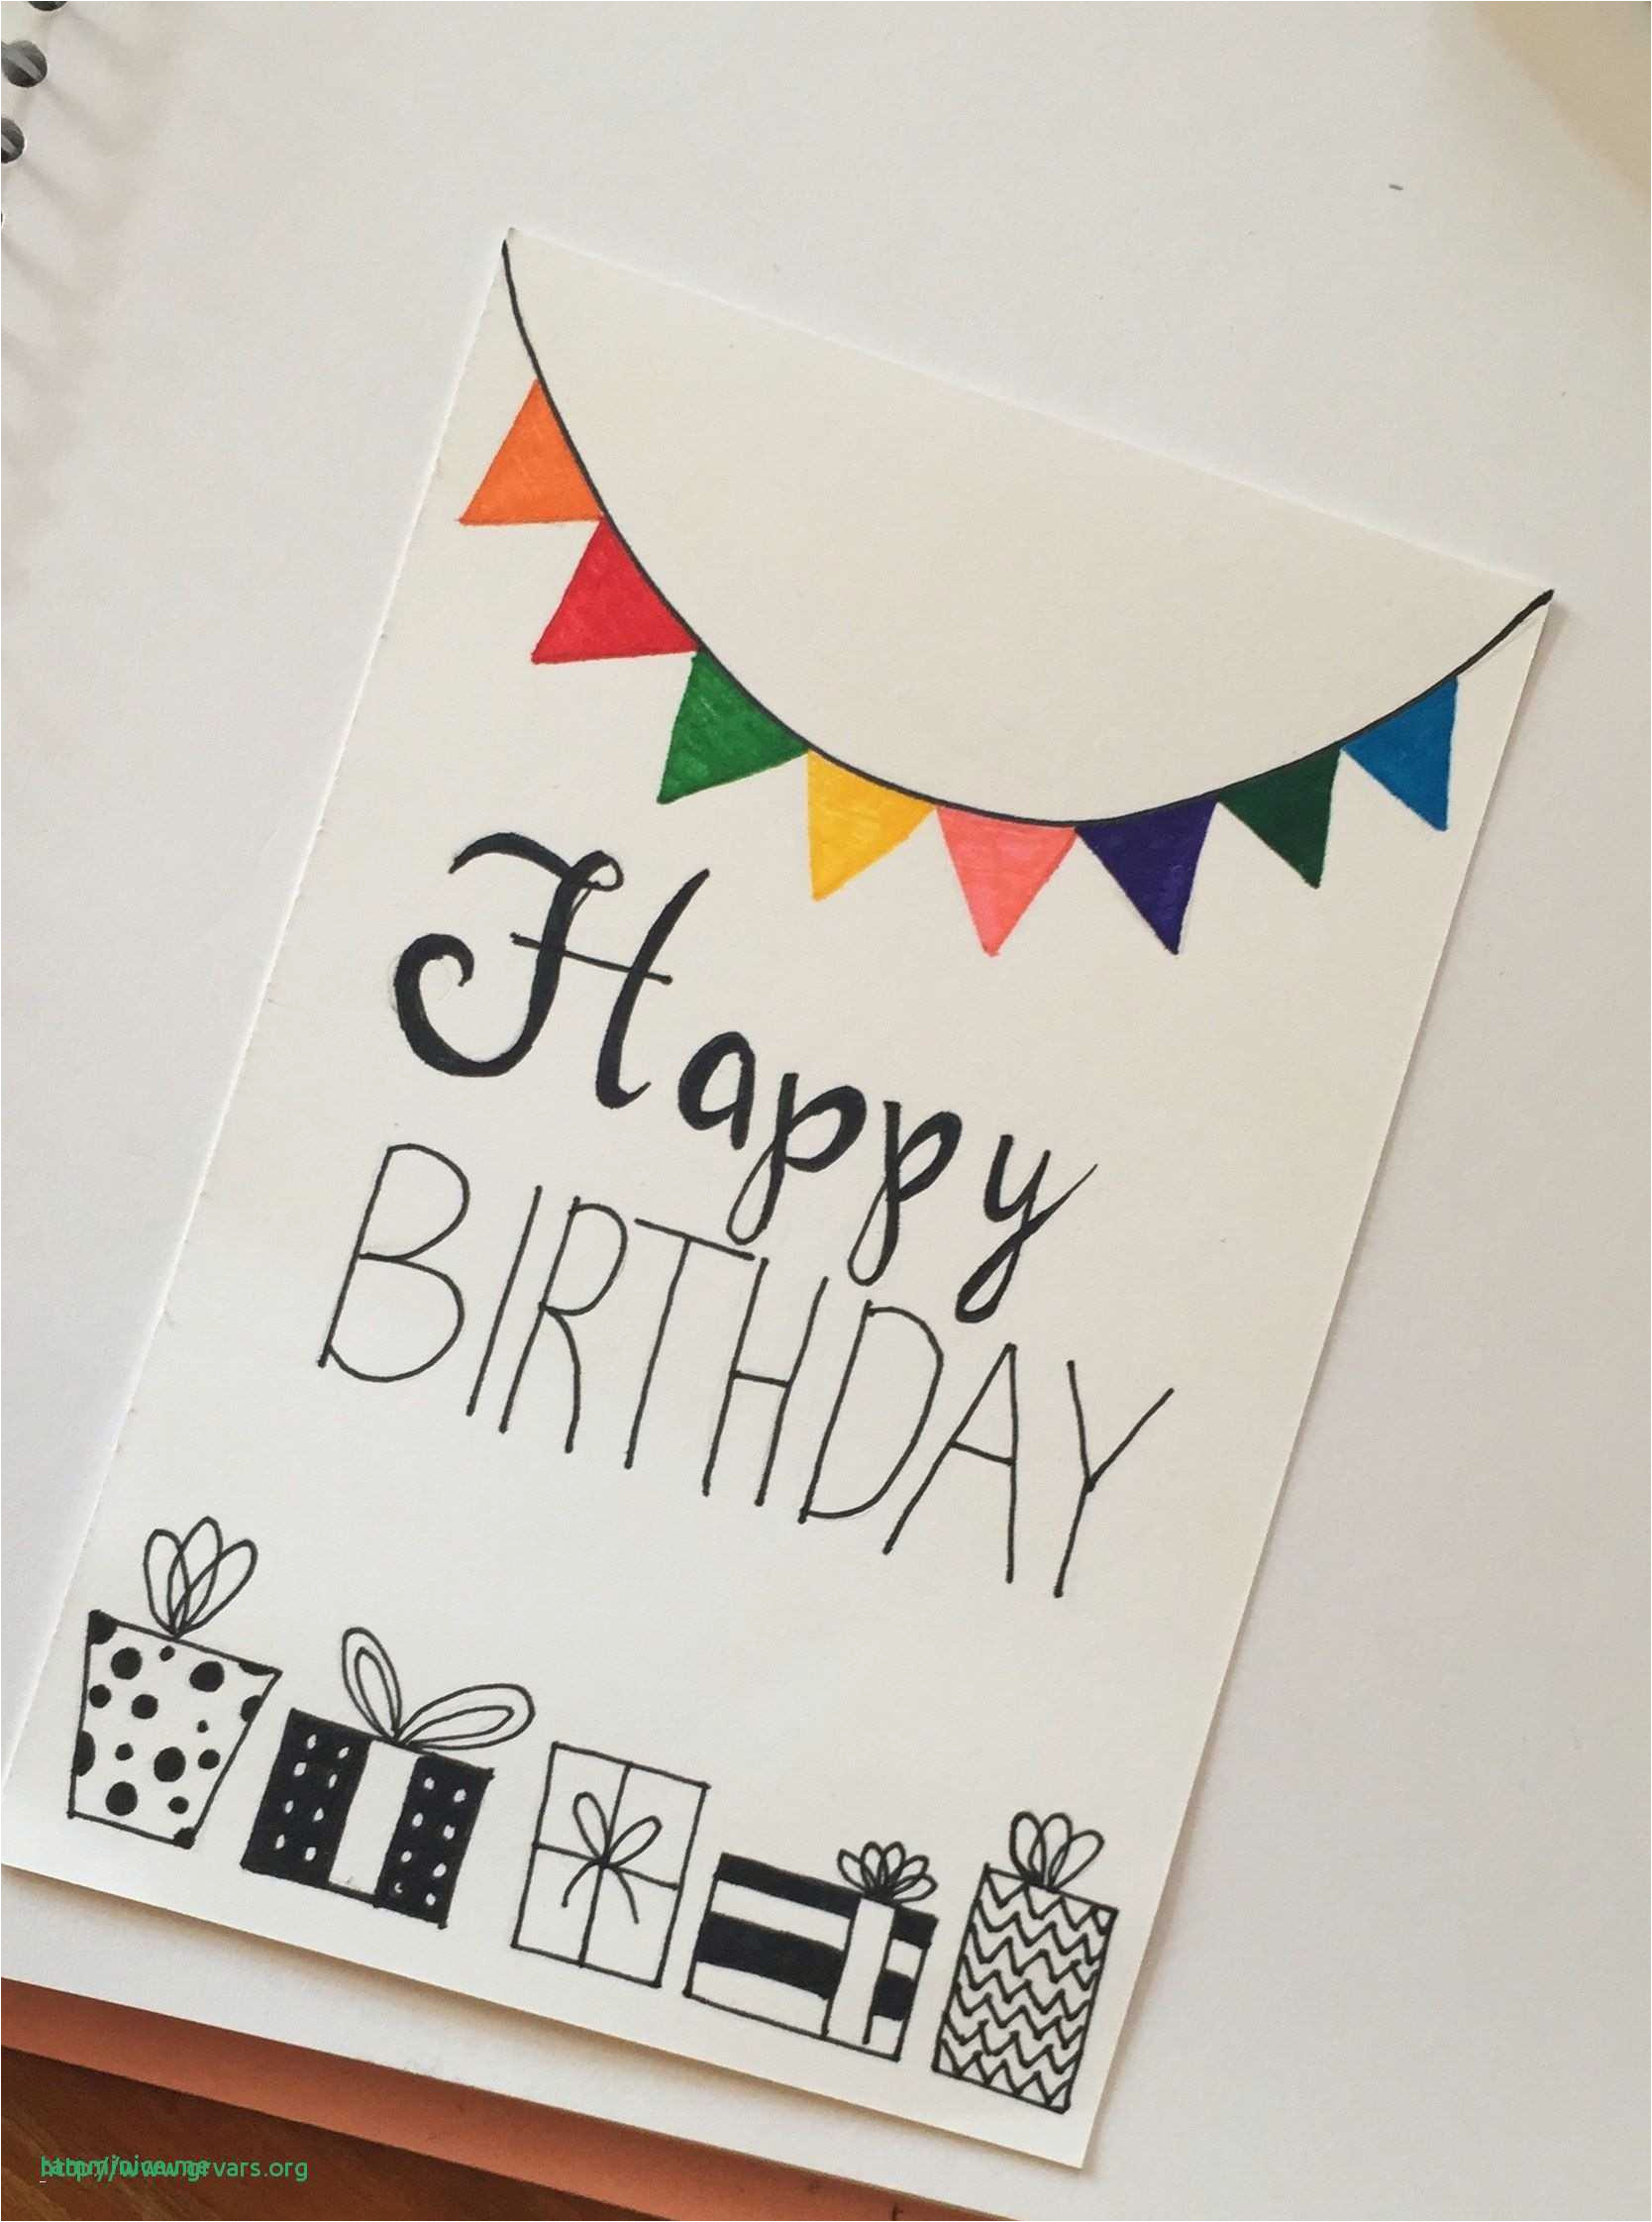 Birthday Card Ideas For Best Friend How To Make Diy Birthday Cards For Best Friend Simple Handmade